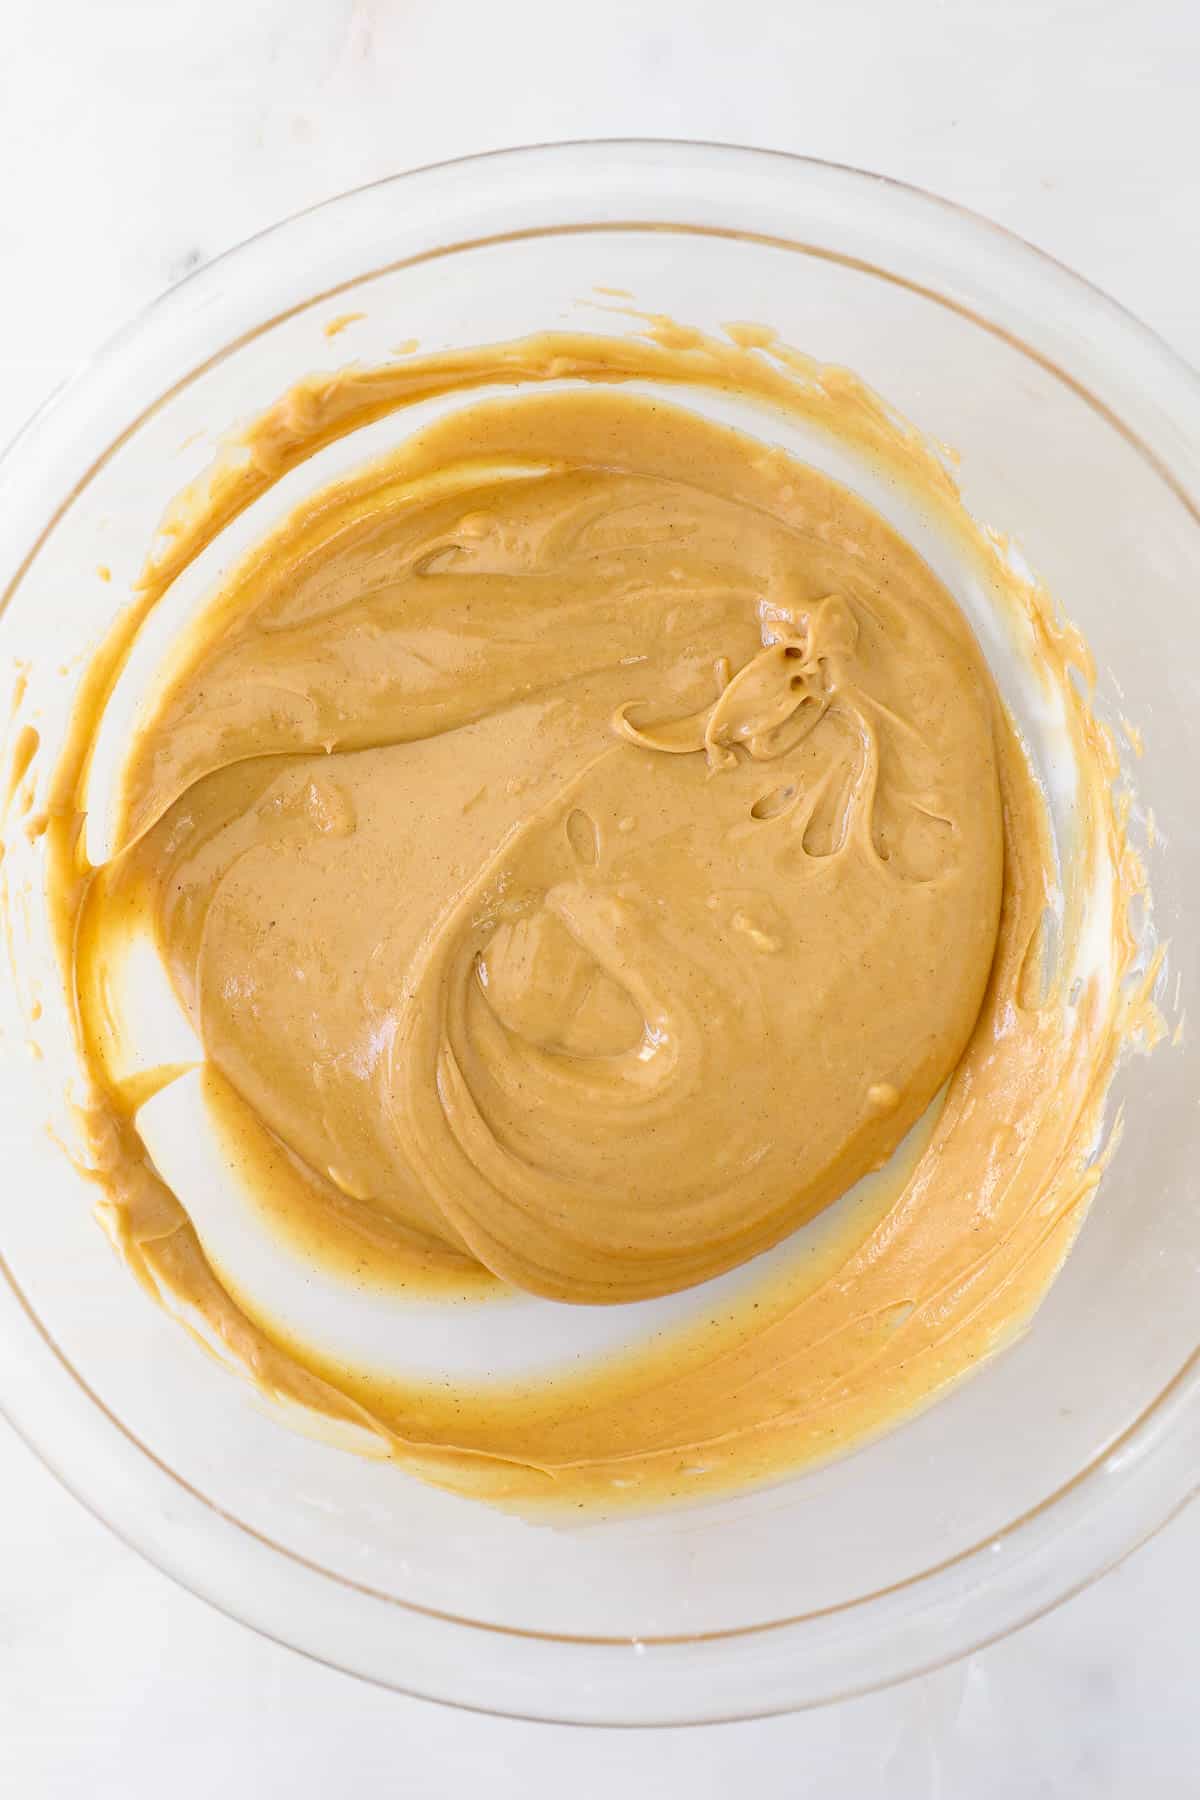 Peanut butter combined with melted butter in a mixing bowl.